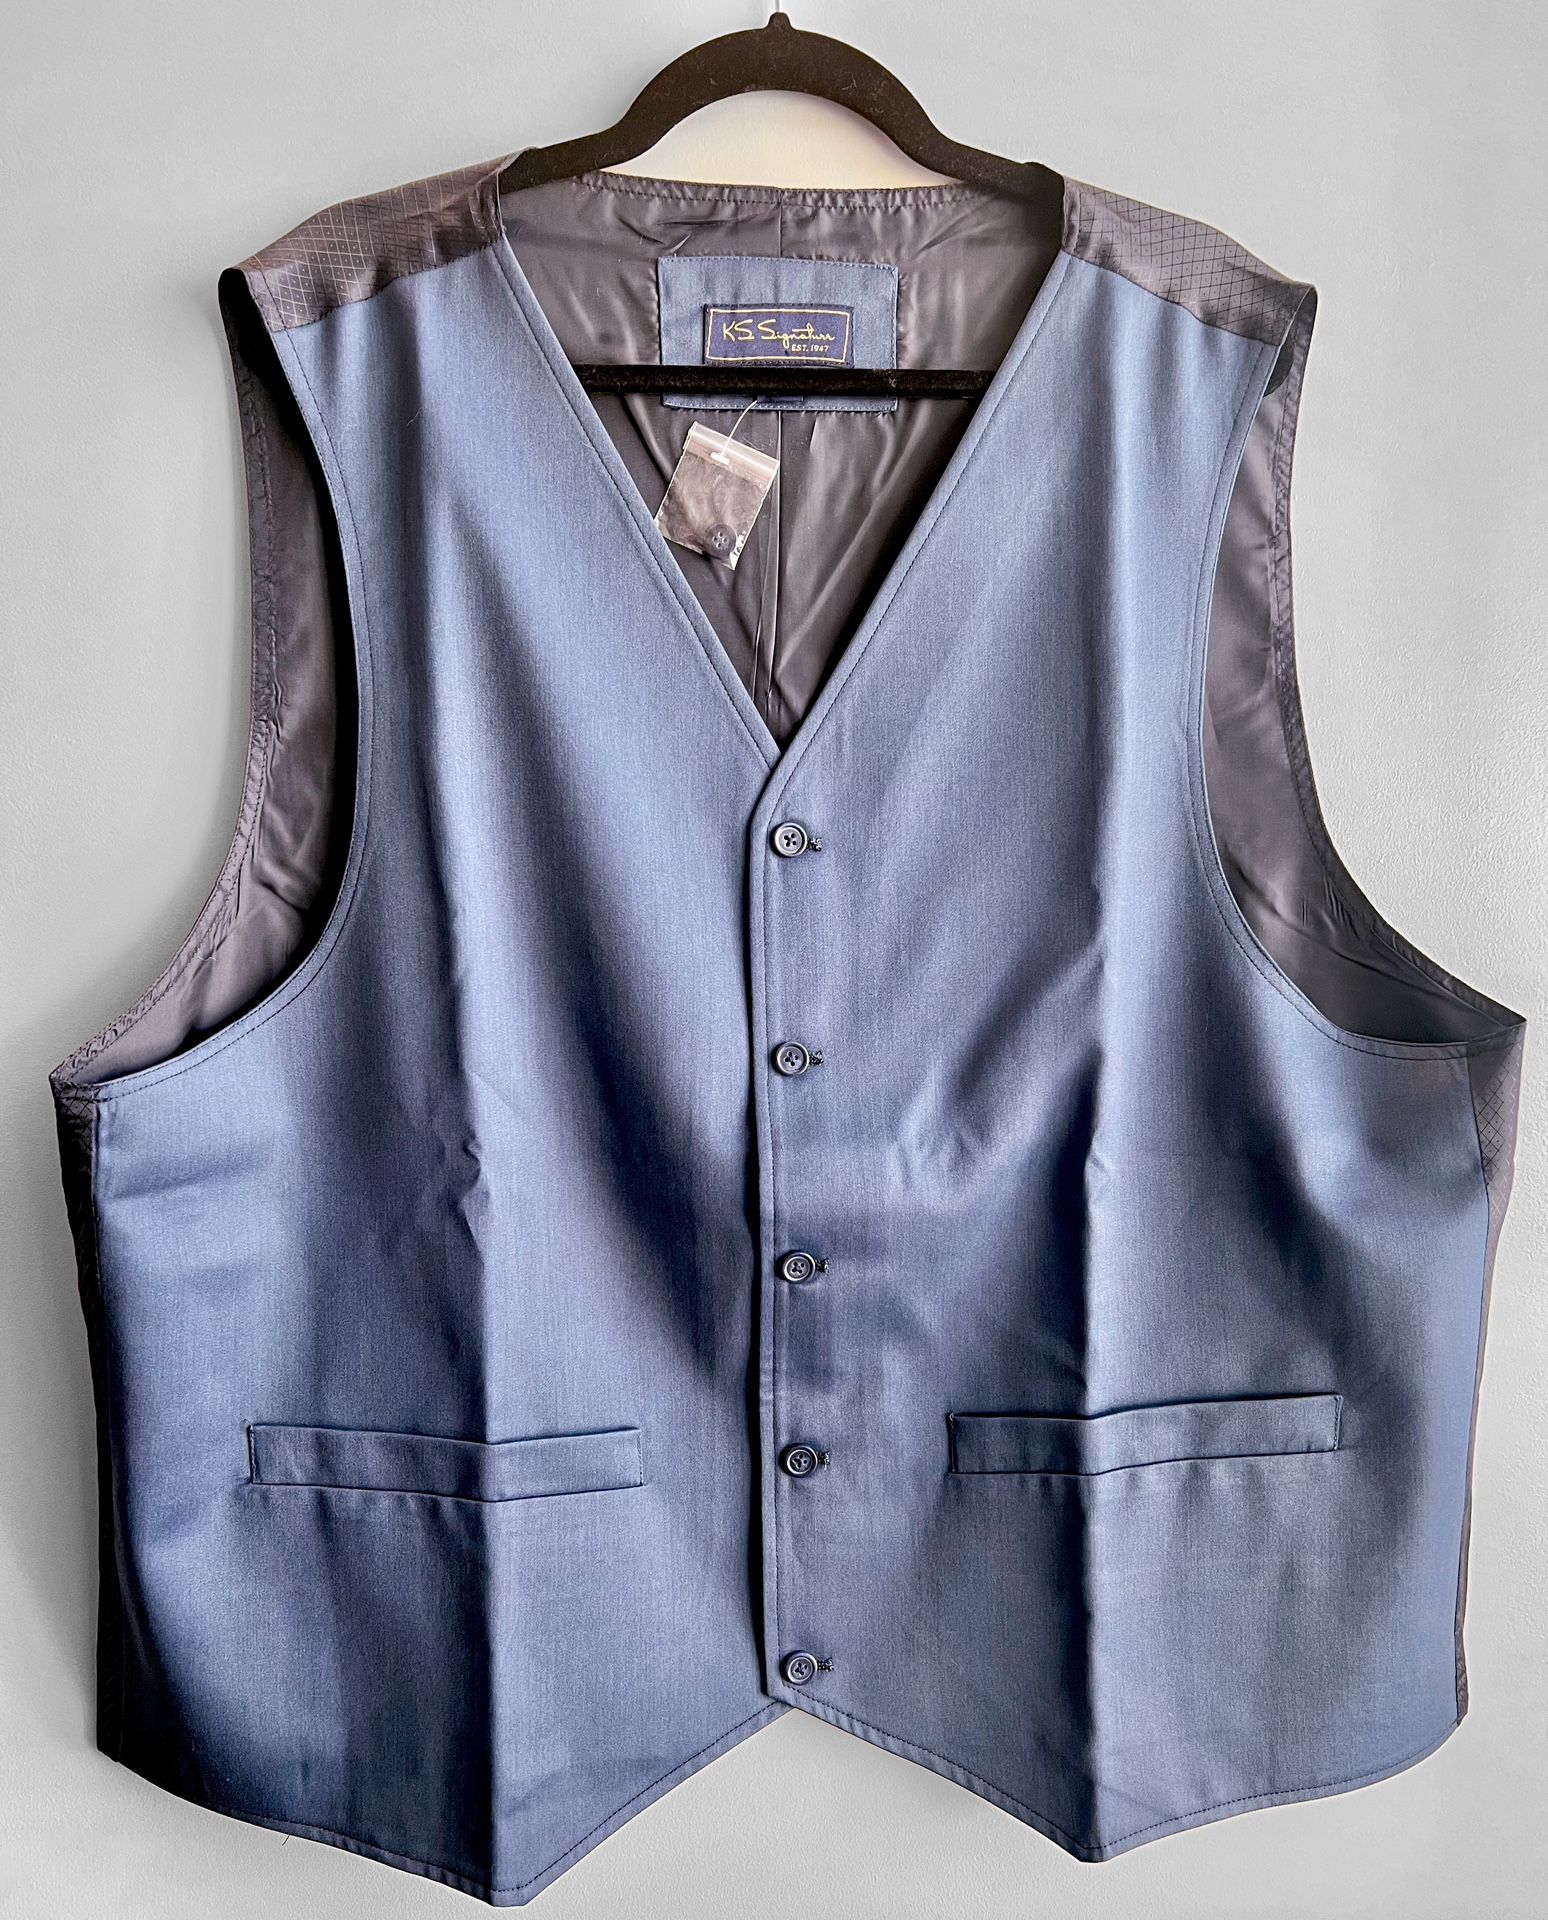 K.S. Est. 1947 King Size Signature Blue Men’s Vest, Size “50 Big,” New, Big and Tall  *Reduced